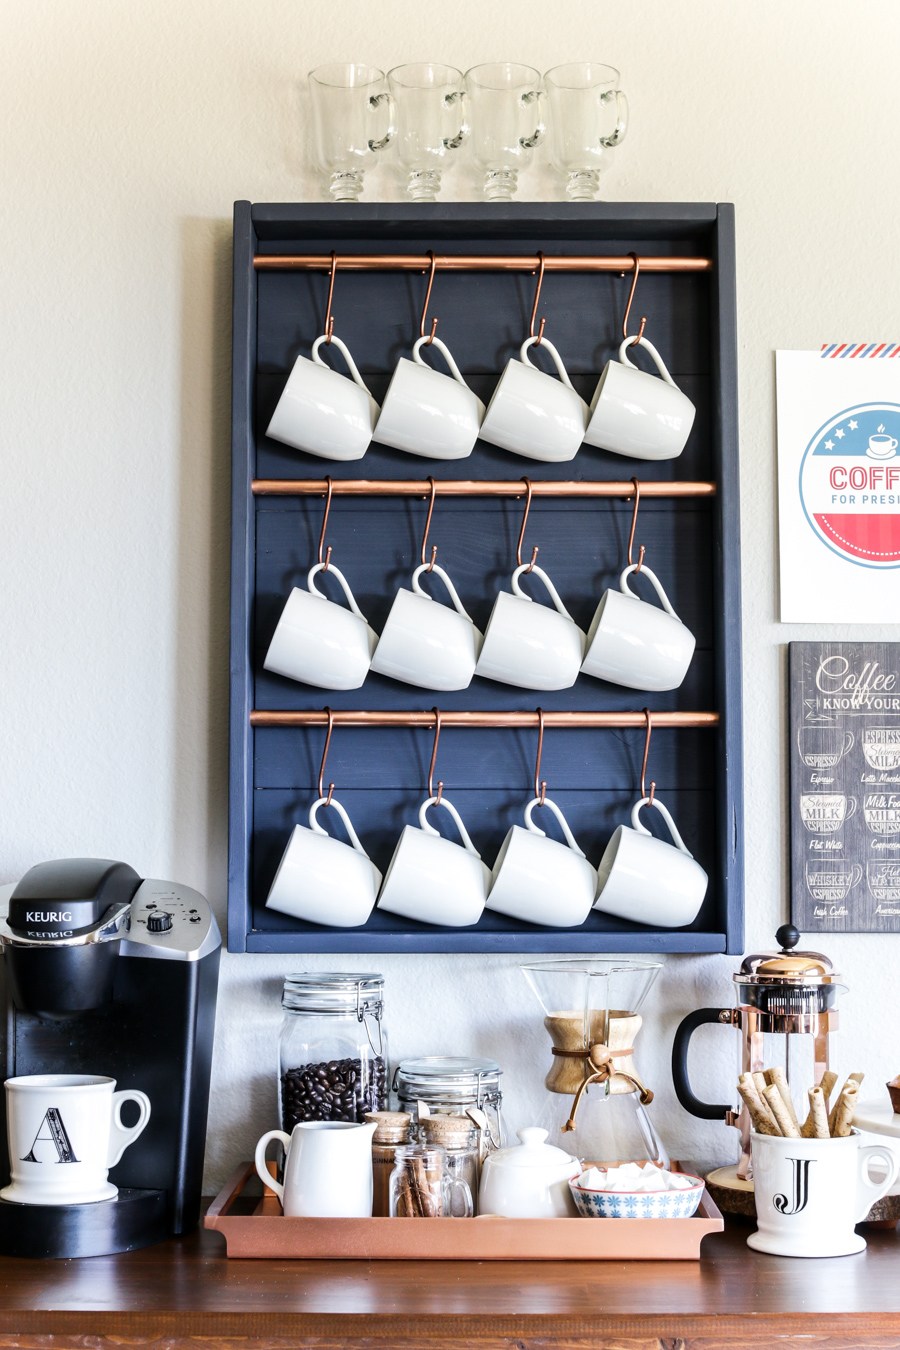 15 Charming DIY Coffee Station Ideas for All Coffee Lovers - DIY Coffee Station Ideas, DIY Coffee Station, Coffee Stations Design Ideas, Coffee Station Ideas, coffee station